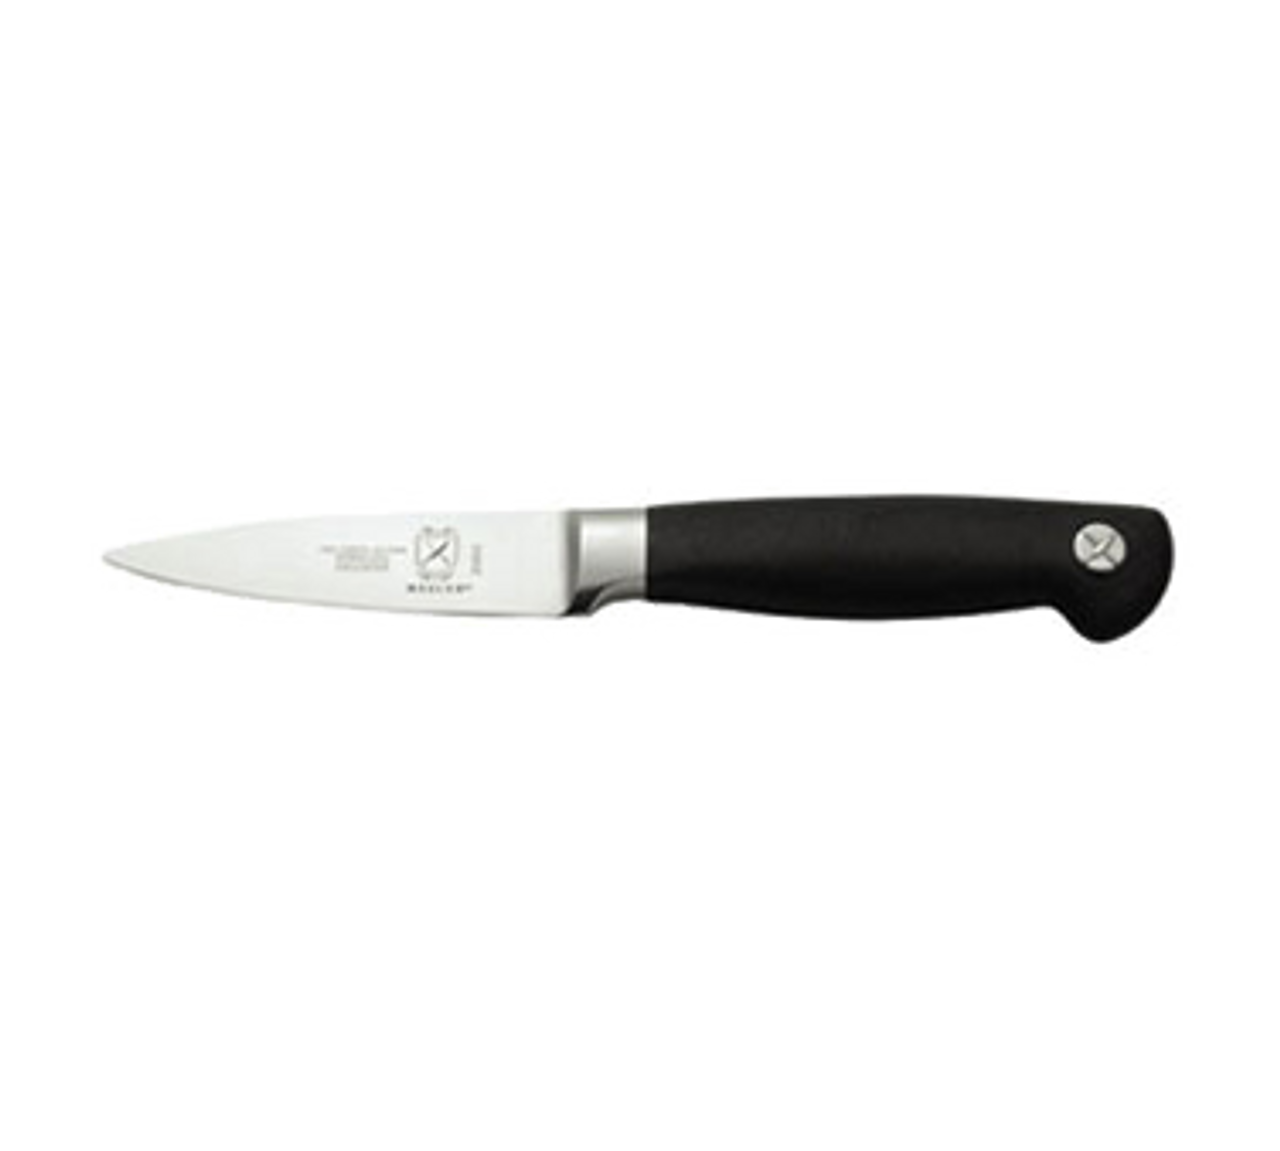 Mercer Cutlery M21030 Carving Knife,10 in.